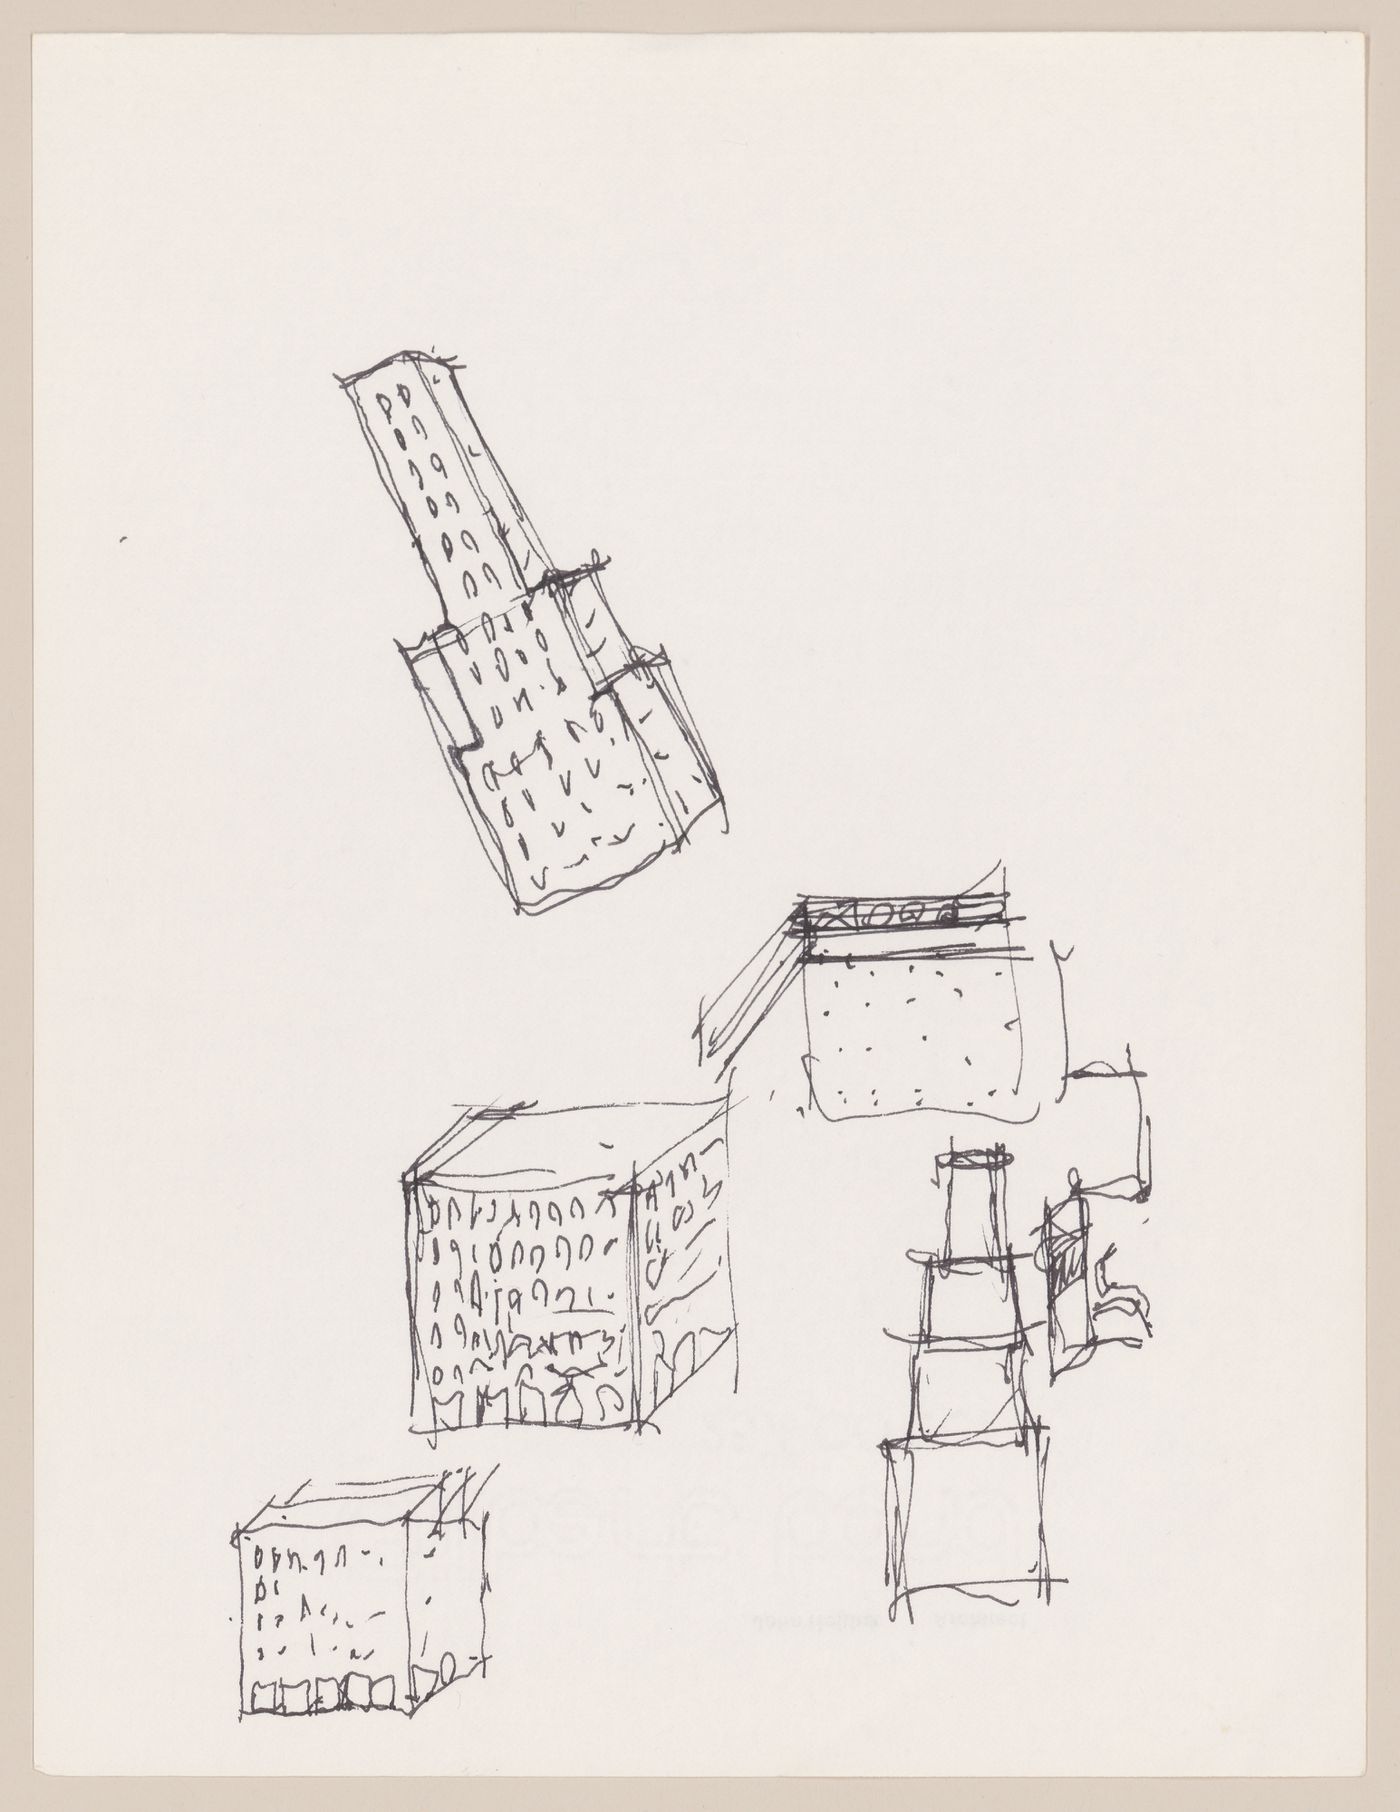 Sketches for Cooper Union Foundation Building Renovation